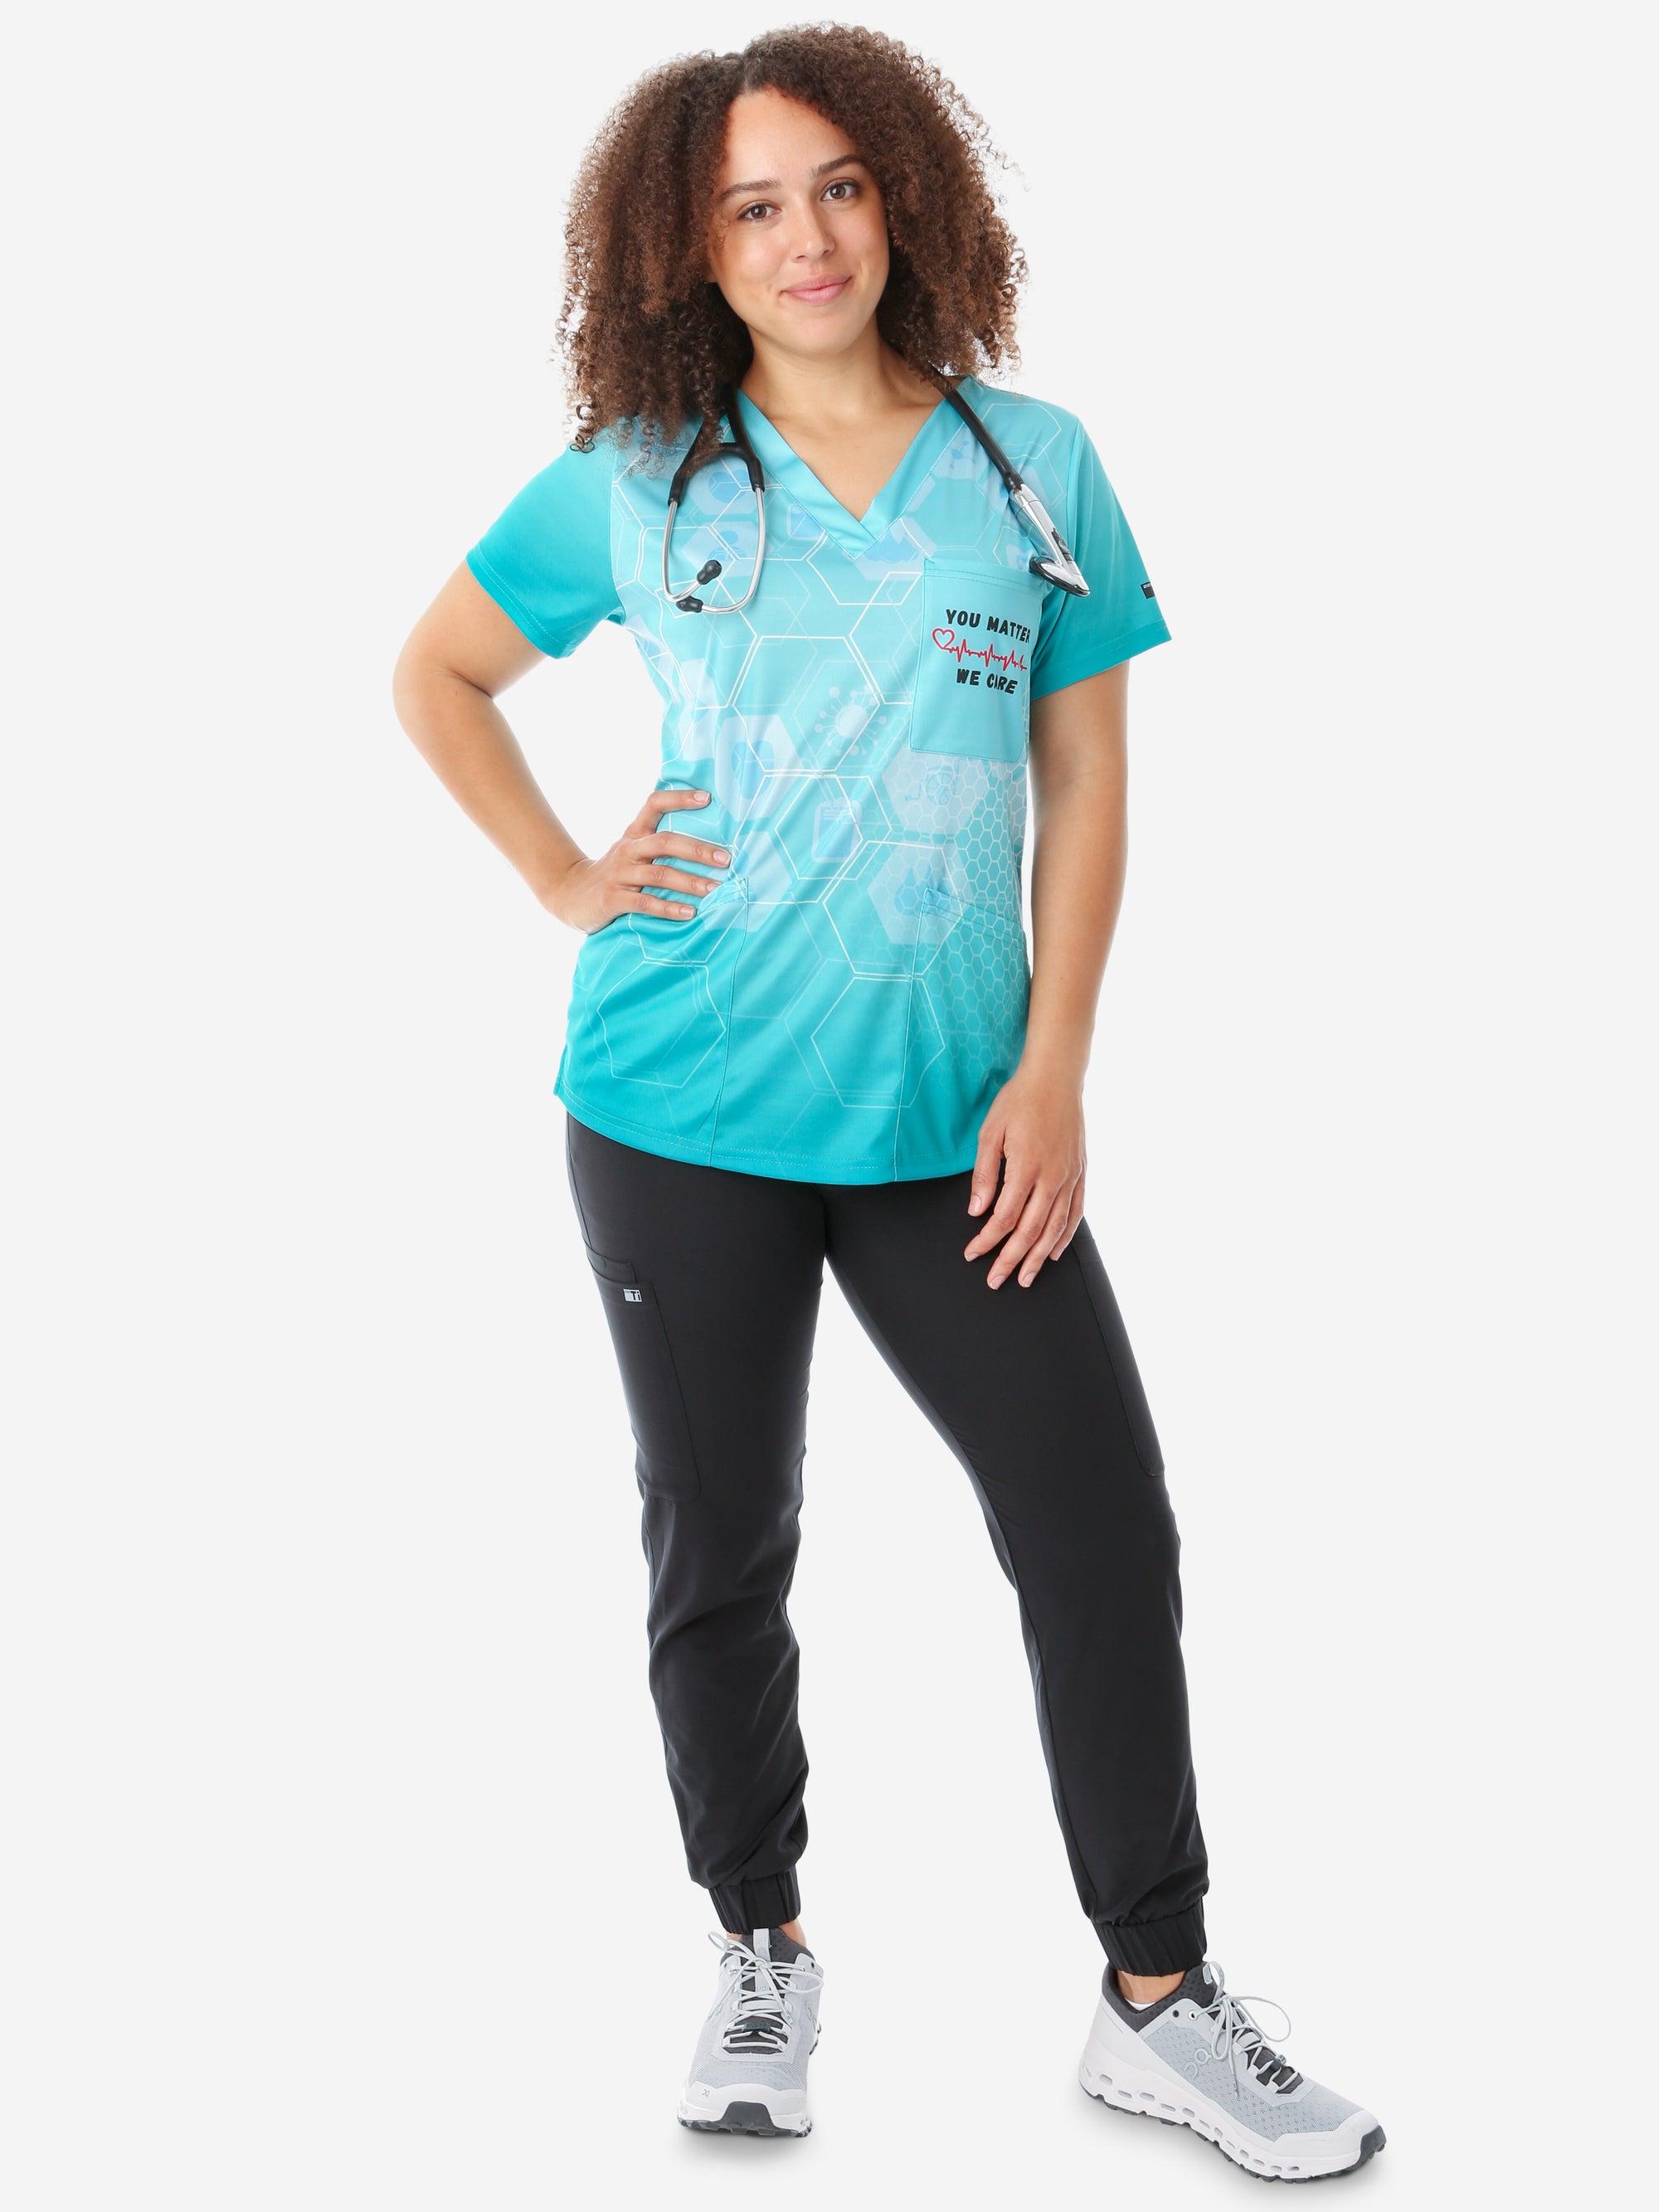 The University of Kansas Health System Nurses Week Contest Women's Scrub Top Maralee Clark Front View Full Body with Joggers